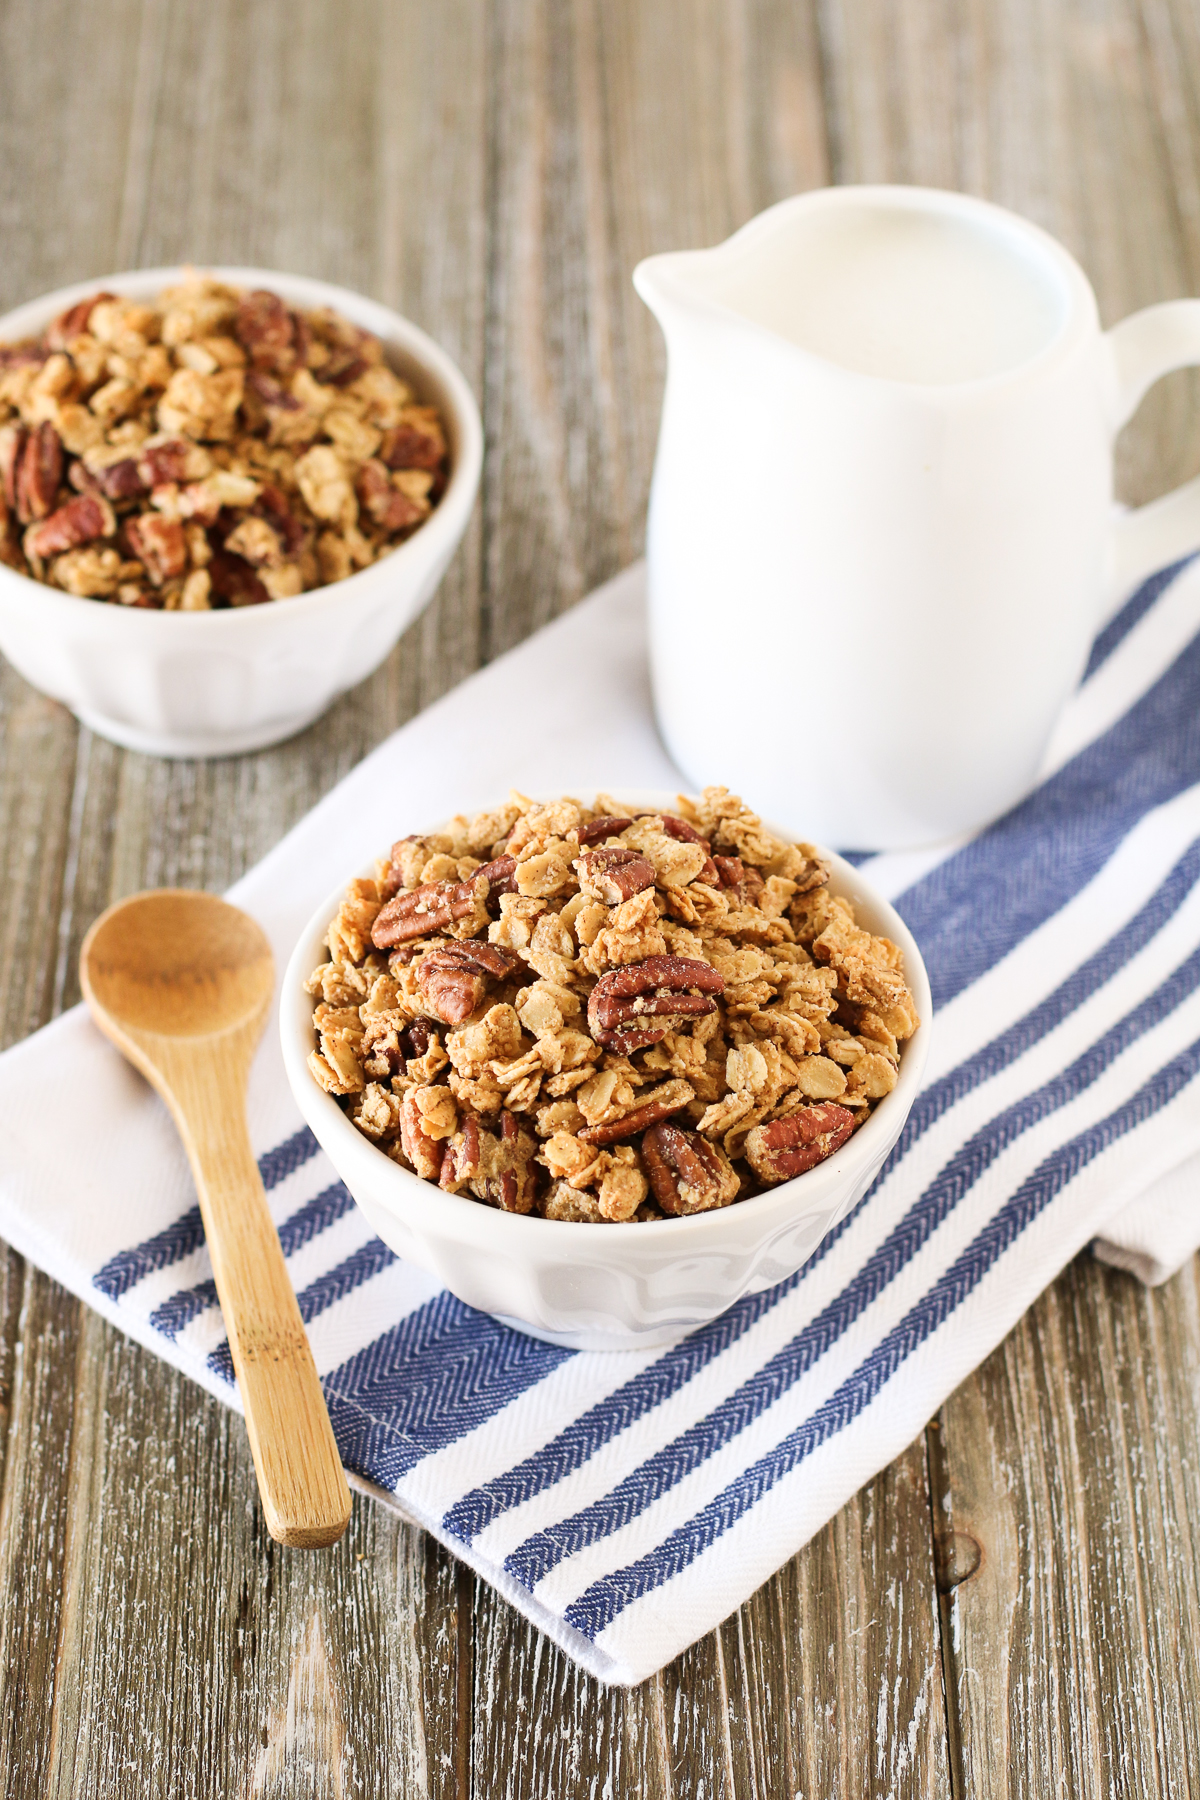 Gluten Free Vegan Pumpkin Spice Granola. For all of the pumpkin spice lovers out there, this homemade granola is for you! 